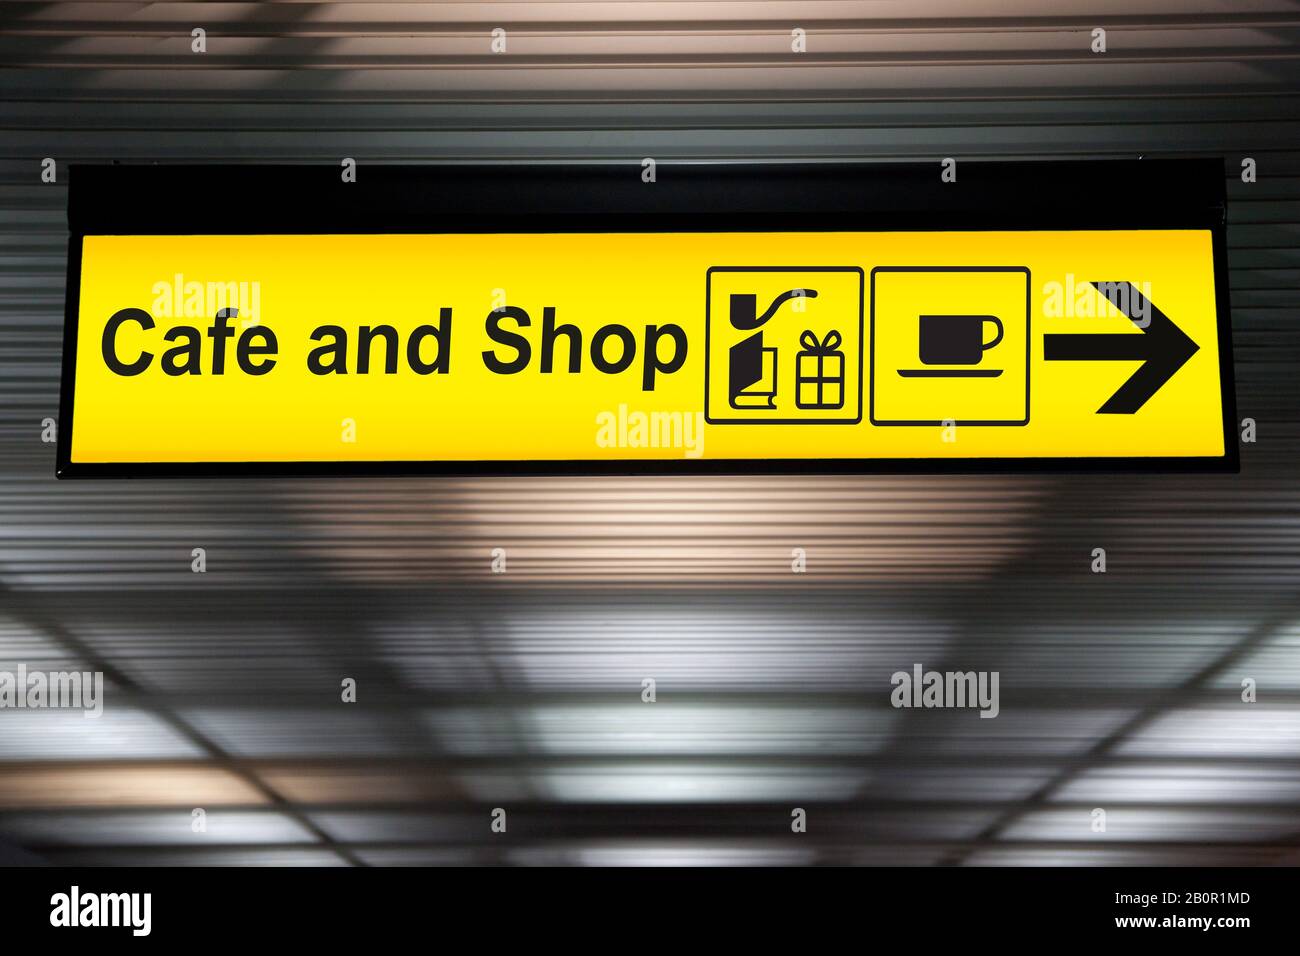 sign cafe and shop with arrow for direction for passenger to buy food , drink and shopping. yellow cafe and shop sign at the airport Stock Photo